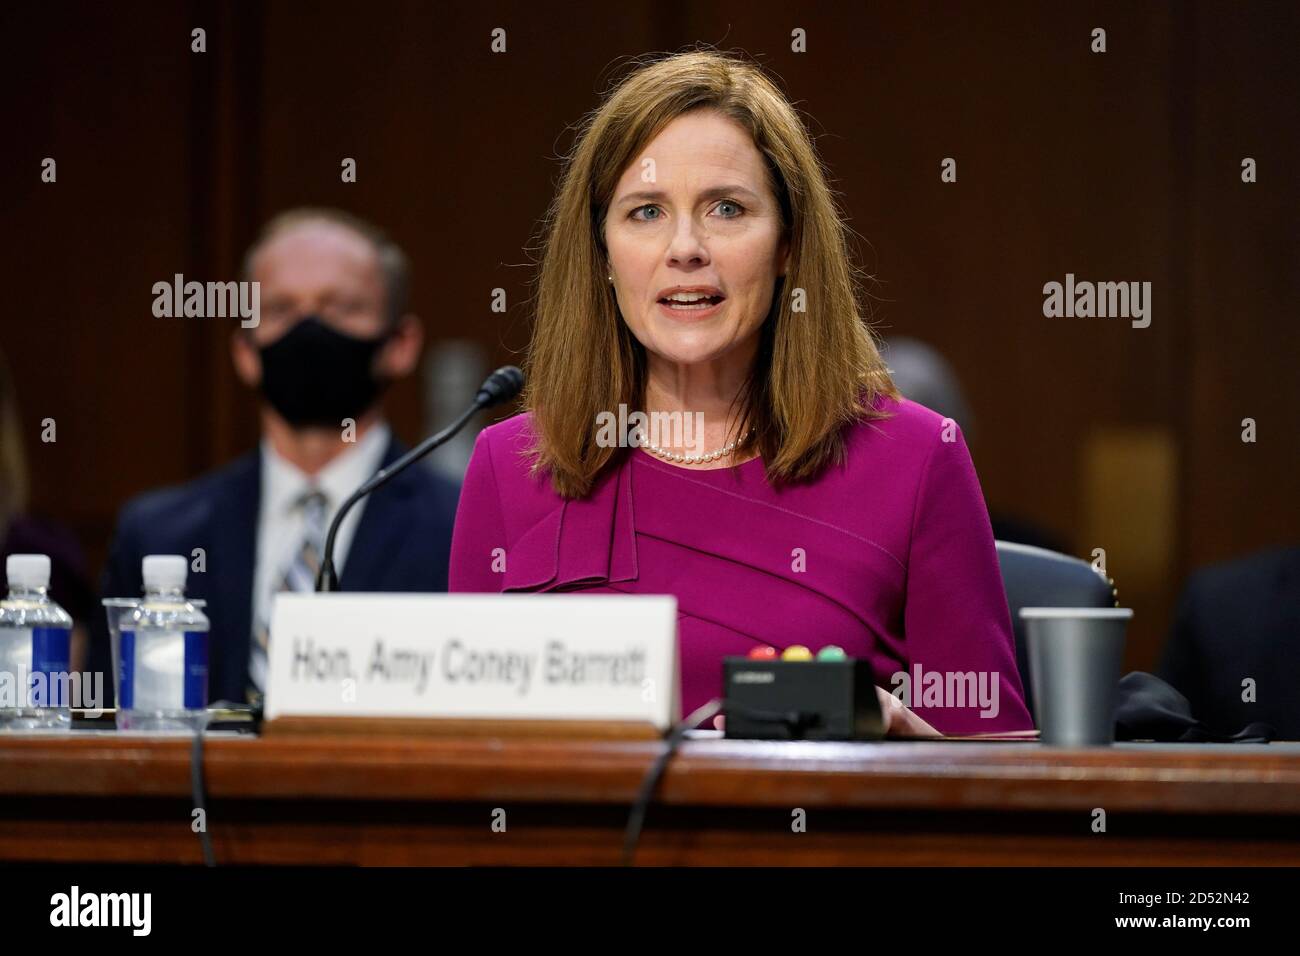 U.S. Supreme Court nominee Amy Coney Barrett speaks during a confirmation hearing before the Senate Judiciary Committee on Capitol Hill in Washington, D.C., U.S., October 12, 2020. Patrick Semansky/Pool via REUTERS Stock Photo